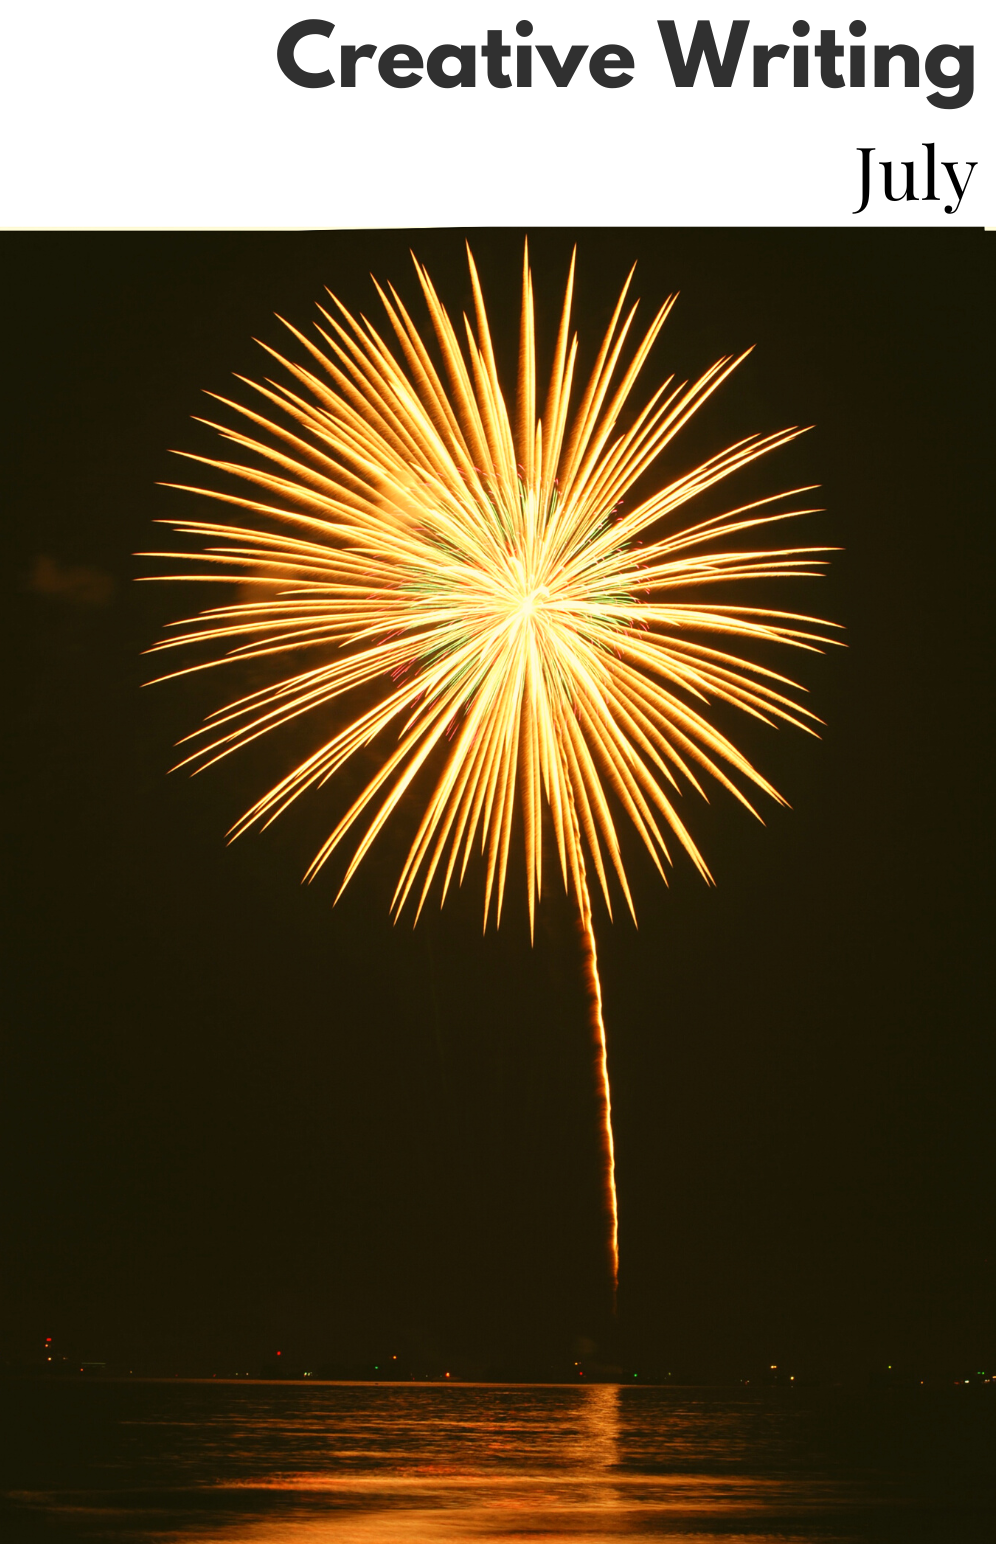 Image of an exploding firework that resembles a dandelion.